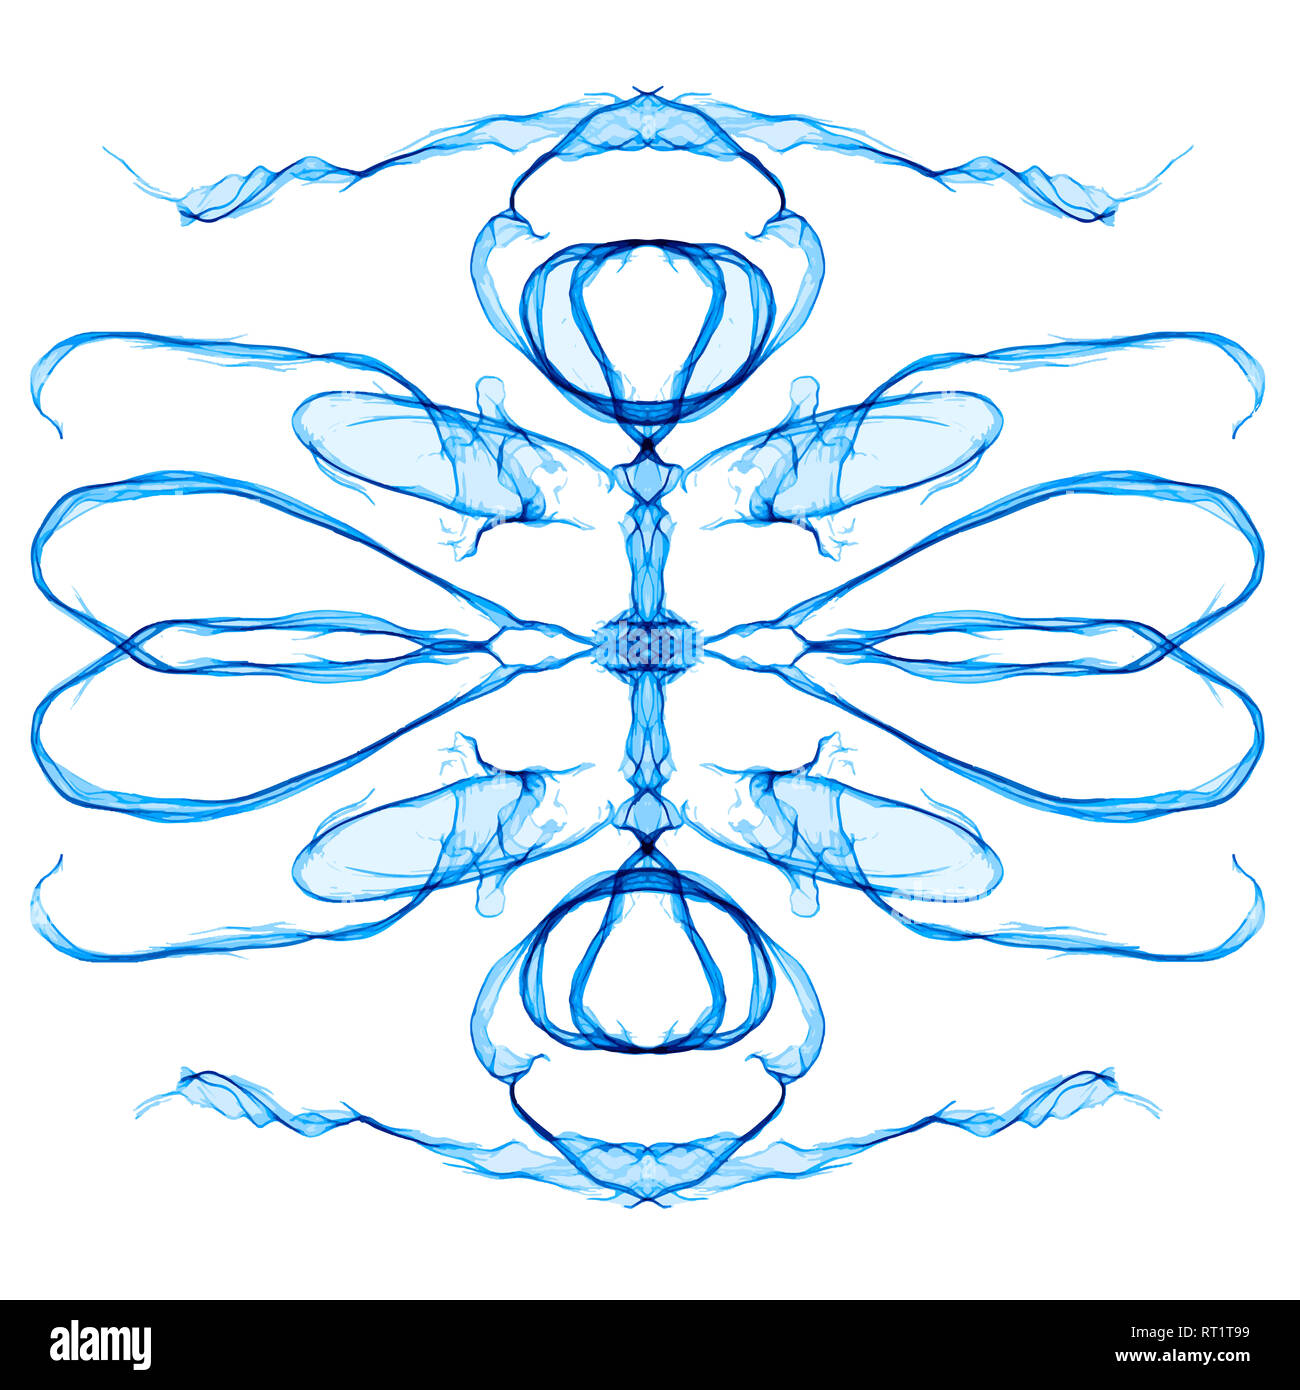 Beautiful abstract symmetry figure. Hand drawn linear abstract pattern for banners, logo, postcards, wallpapers etc. Stock Photo